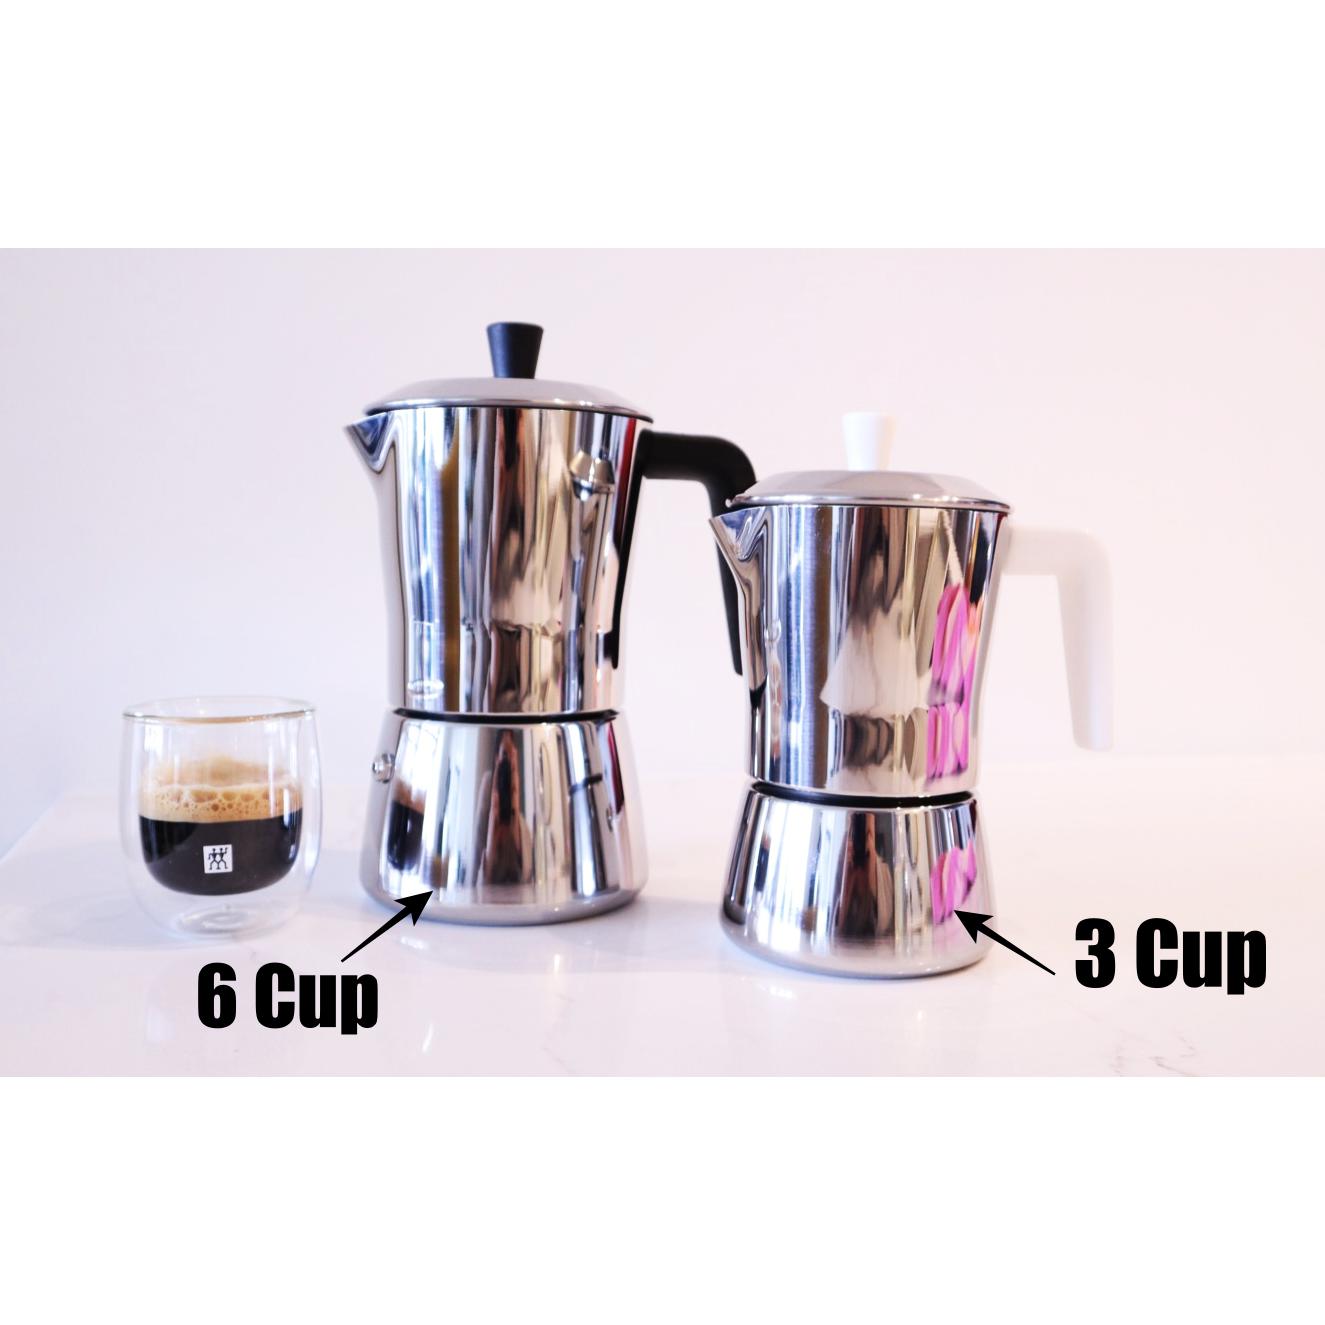 Giannini TUA - 6 cup Stainless Steel Stove Top Espresso Maker (Black Handle) side by side USA